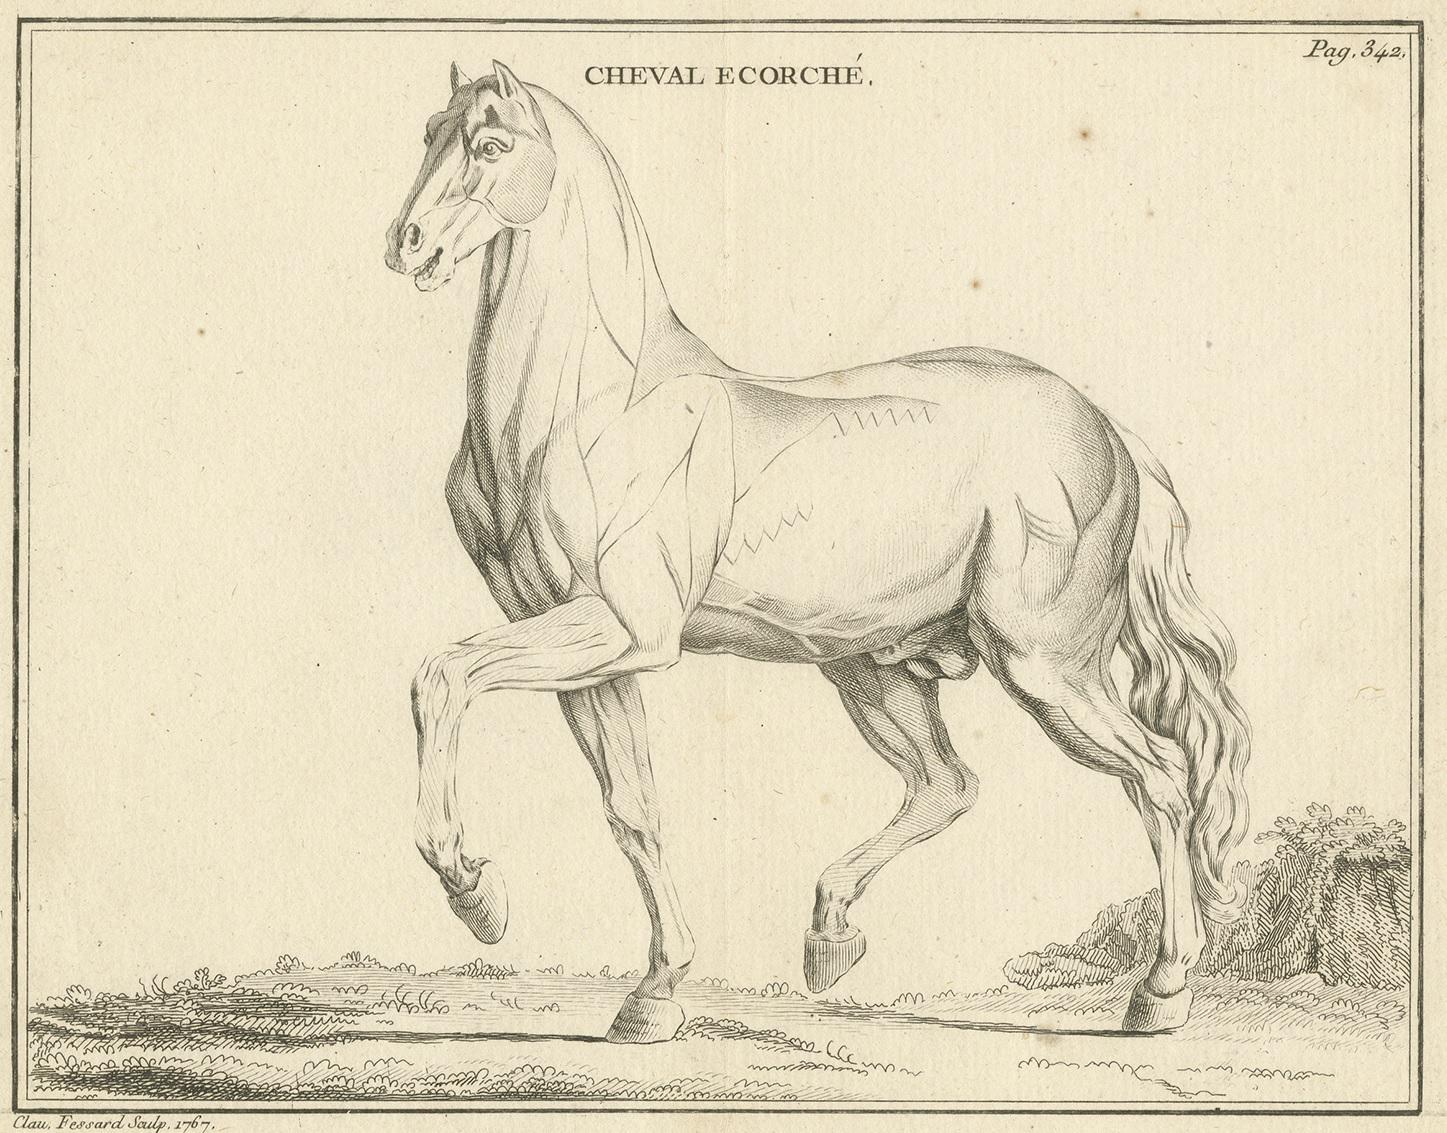 Antique print titled 'Cheval Ecorché'. Copper engraving of an écorché of a horse. An écorché is a figure drawn, painted, or sculpted showing the muscles of the body without skin. This print originates from 'Handboek der genees- en verloskunde van